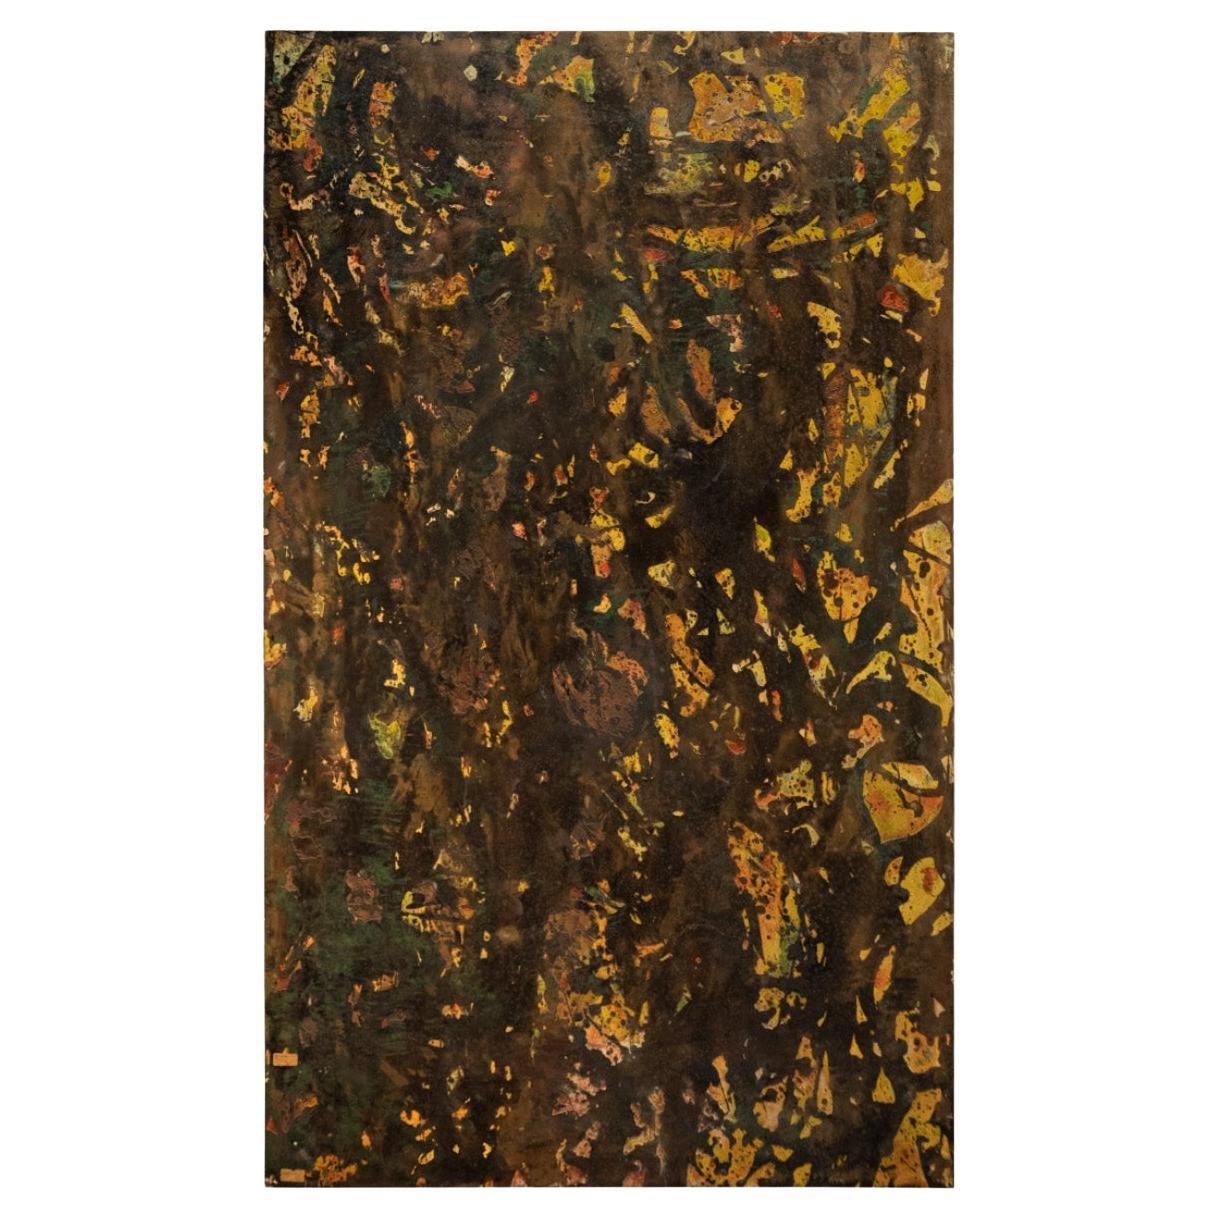 Kelvin & Phillip LaVerne Large Abstract Painting "Autumn" 1960s (Signed)